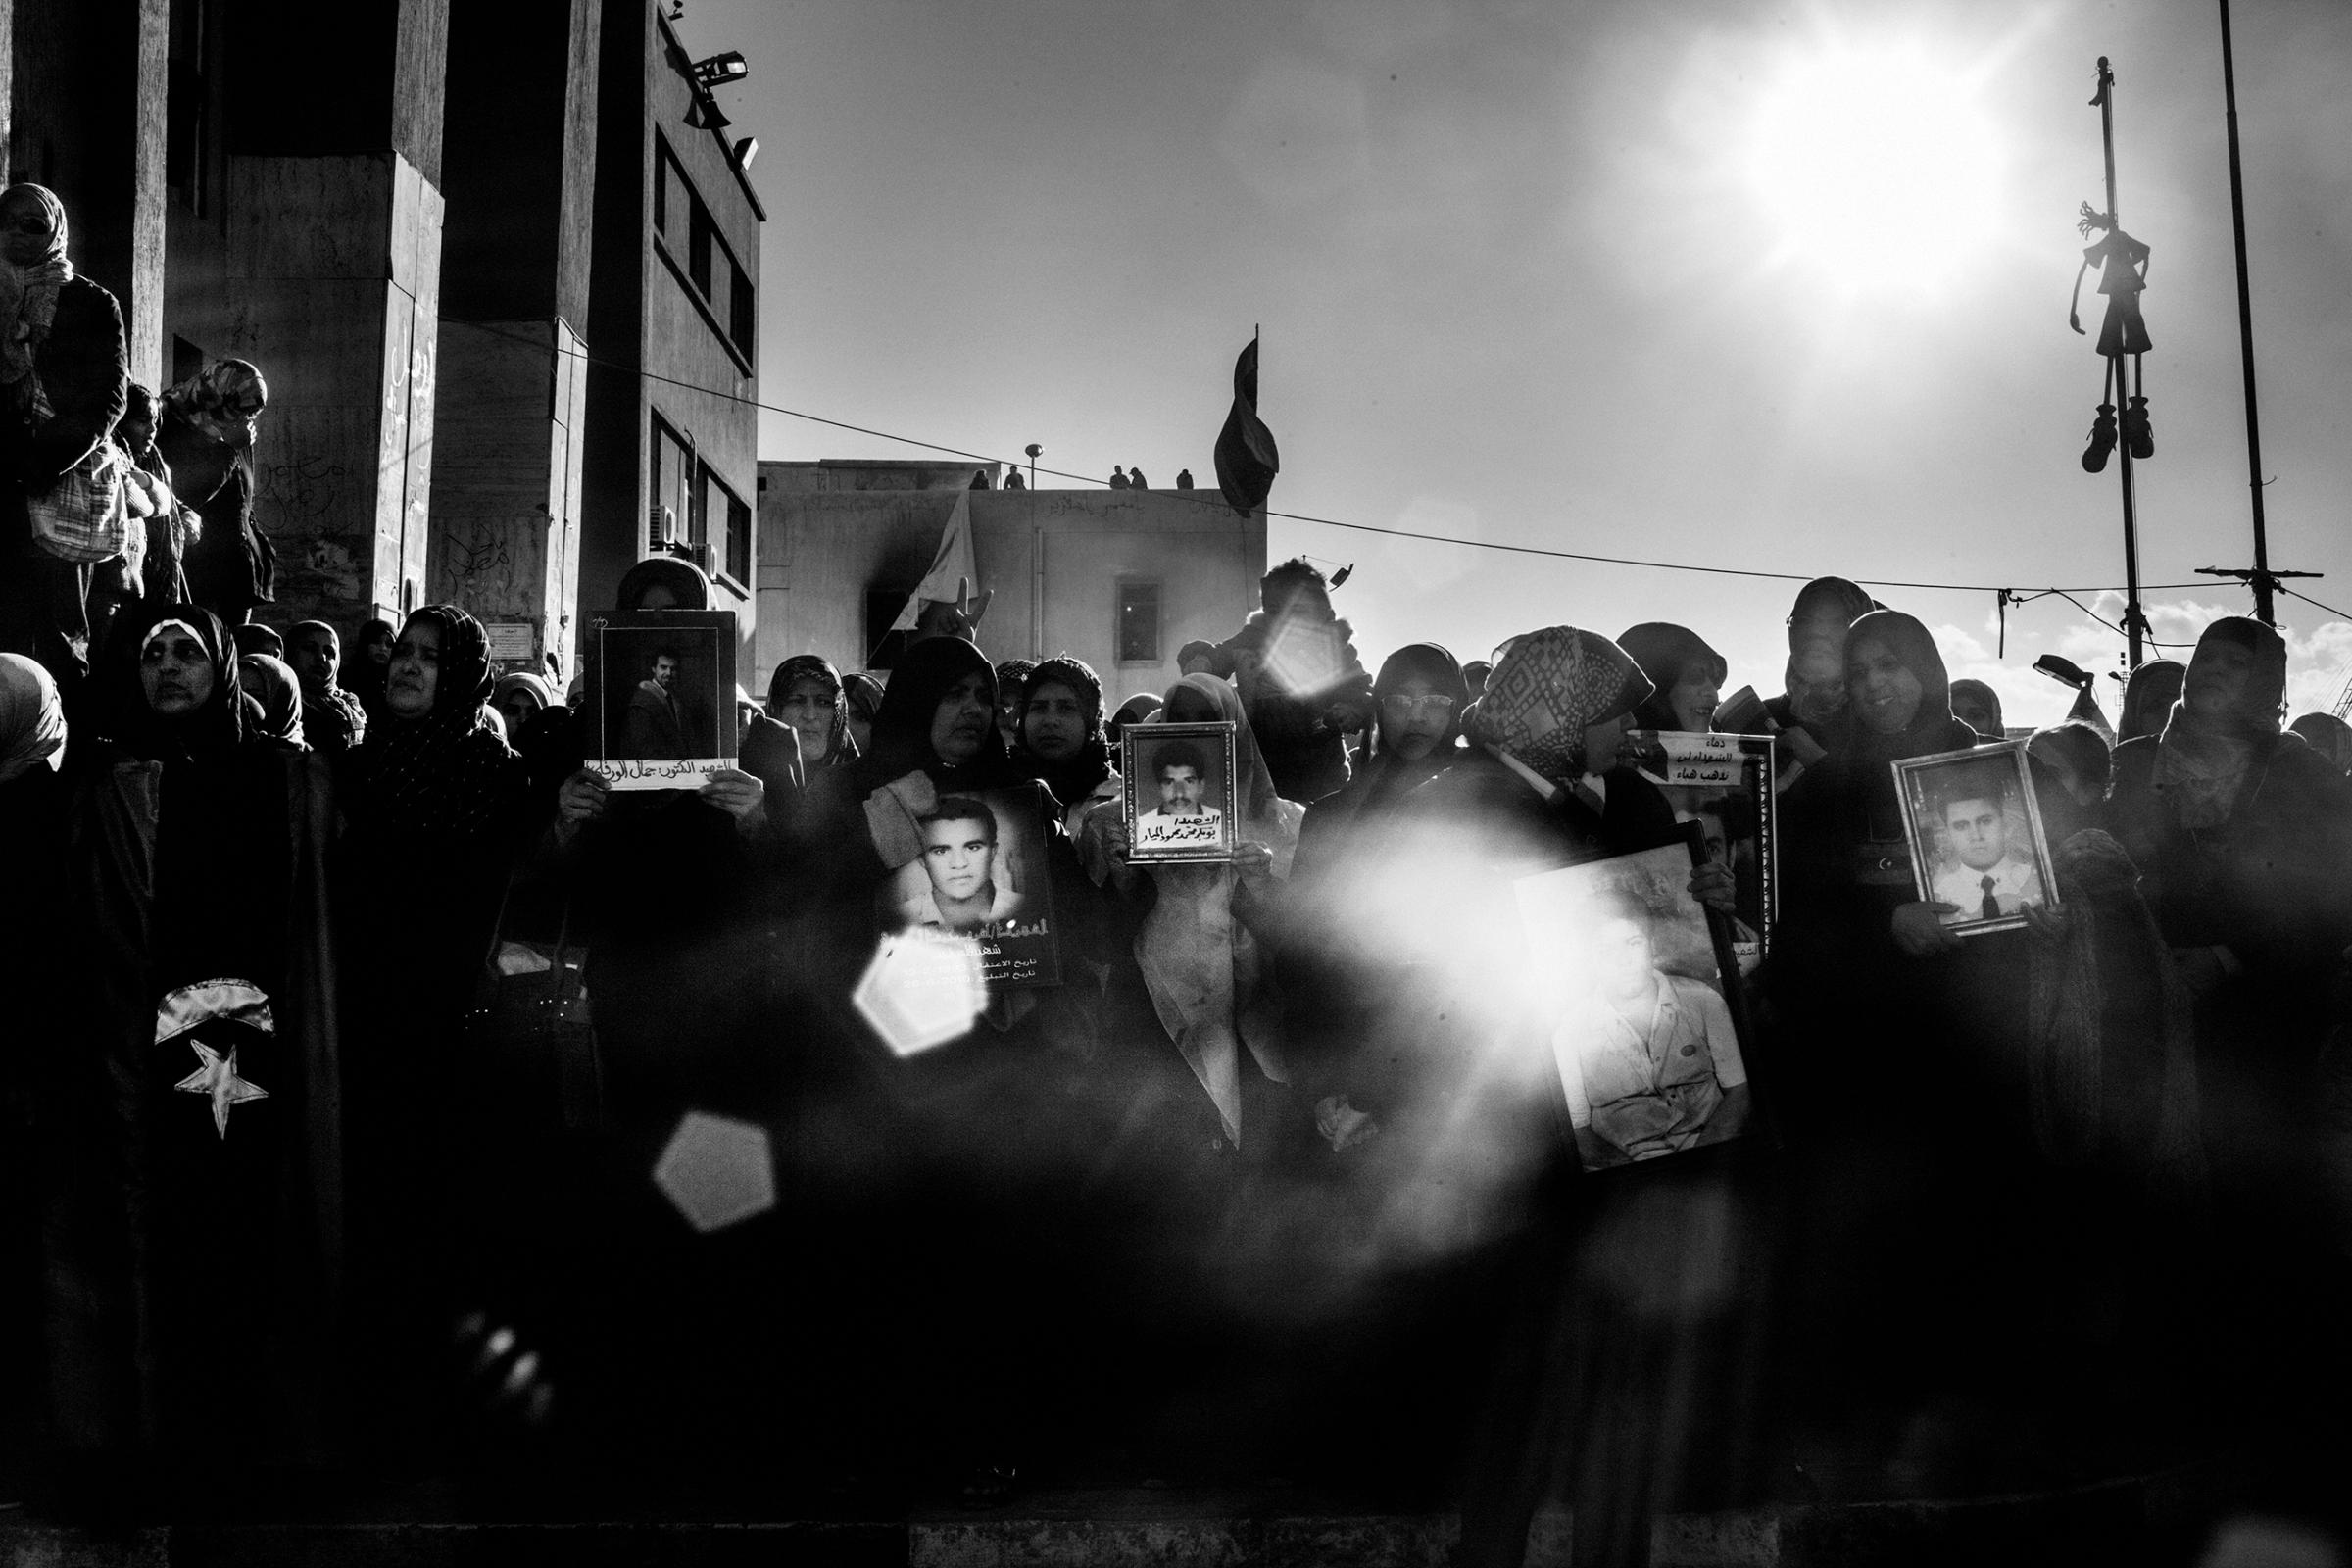 Libyan women demonstrate in the central square of Benghazi in memory of the death of fighters killed by Gaddafi forces, Feb. 28, 2011.